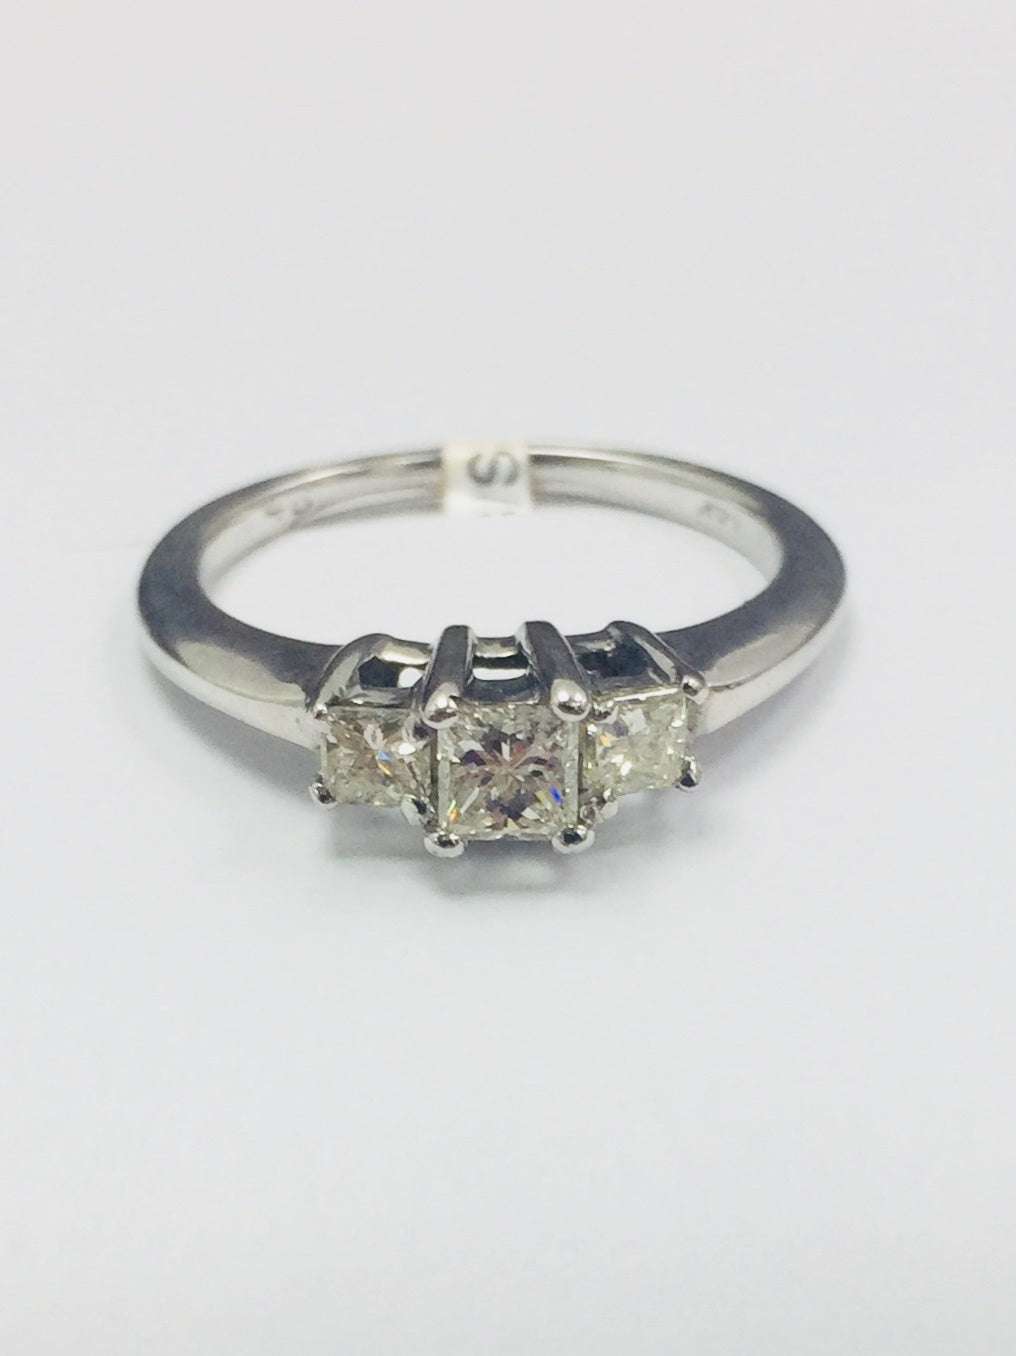 14K WHITE GOLD 3 STONE 0.48CTS RING - PEARSON - Robert Openshaw Fine Jewellery